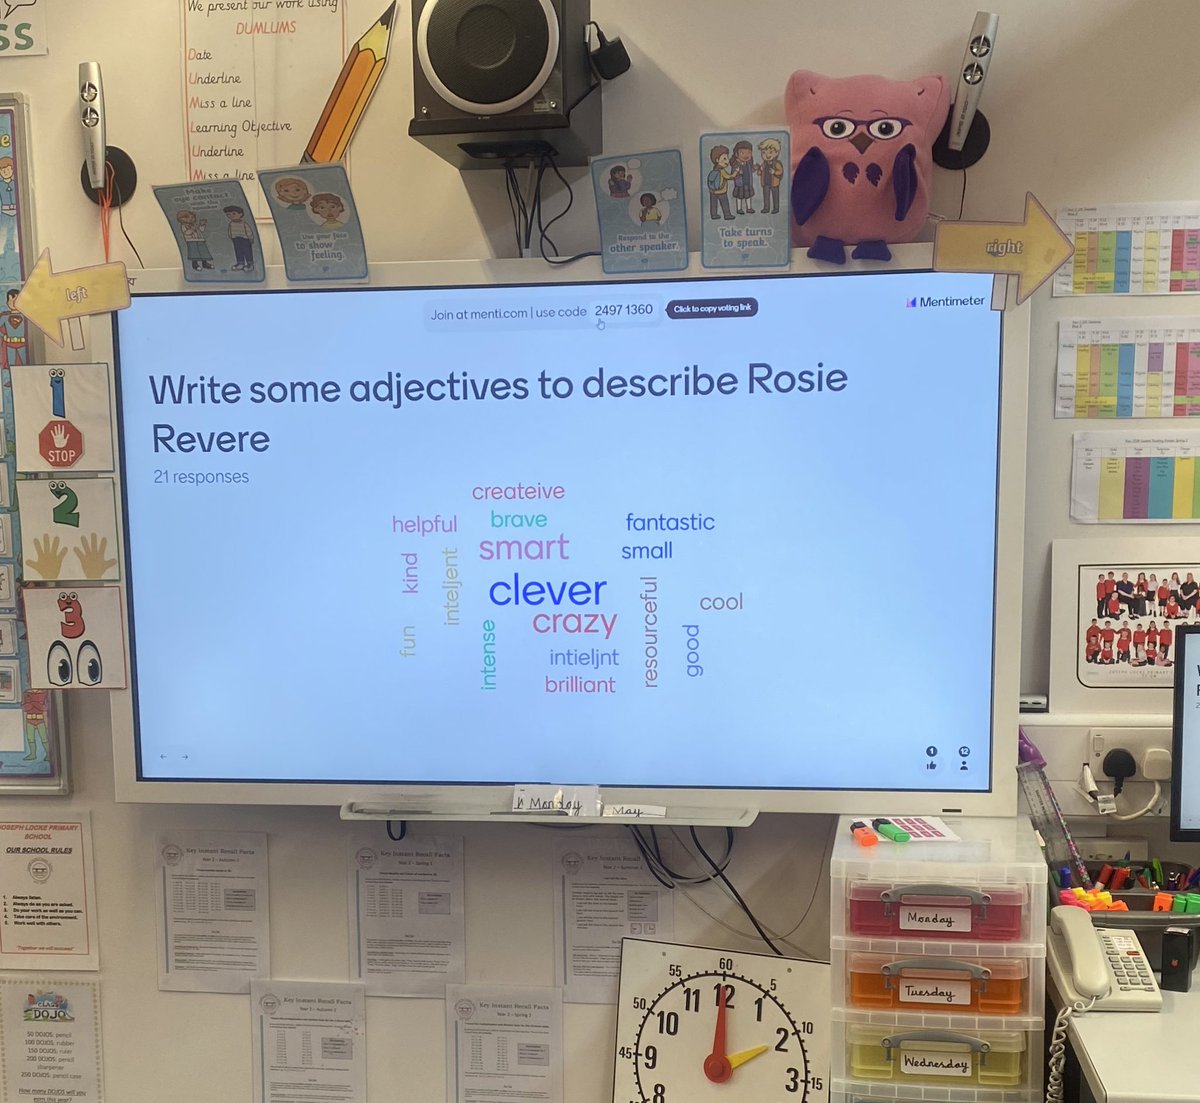 Our first time using mentimetre! We created a word cloud using adjectives to describe Rosie Revere!